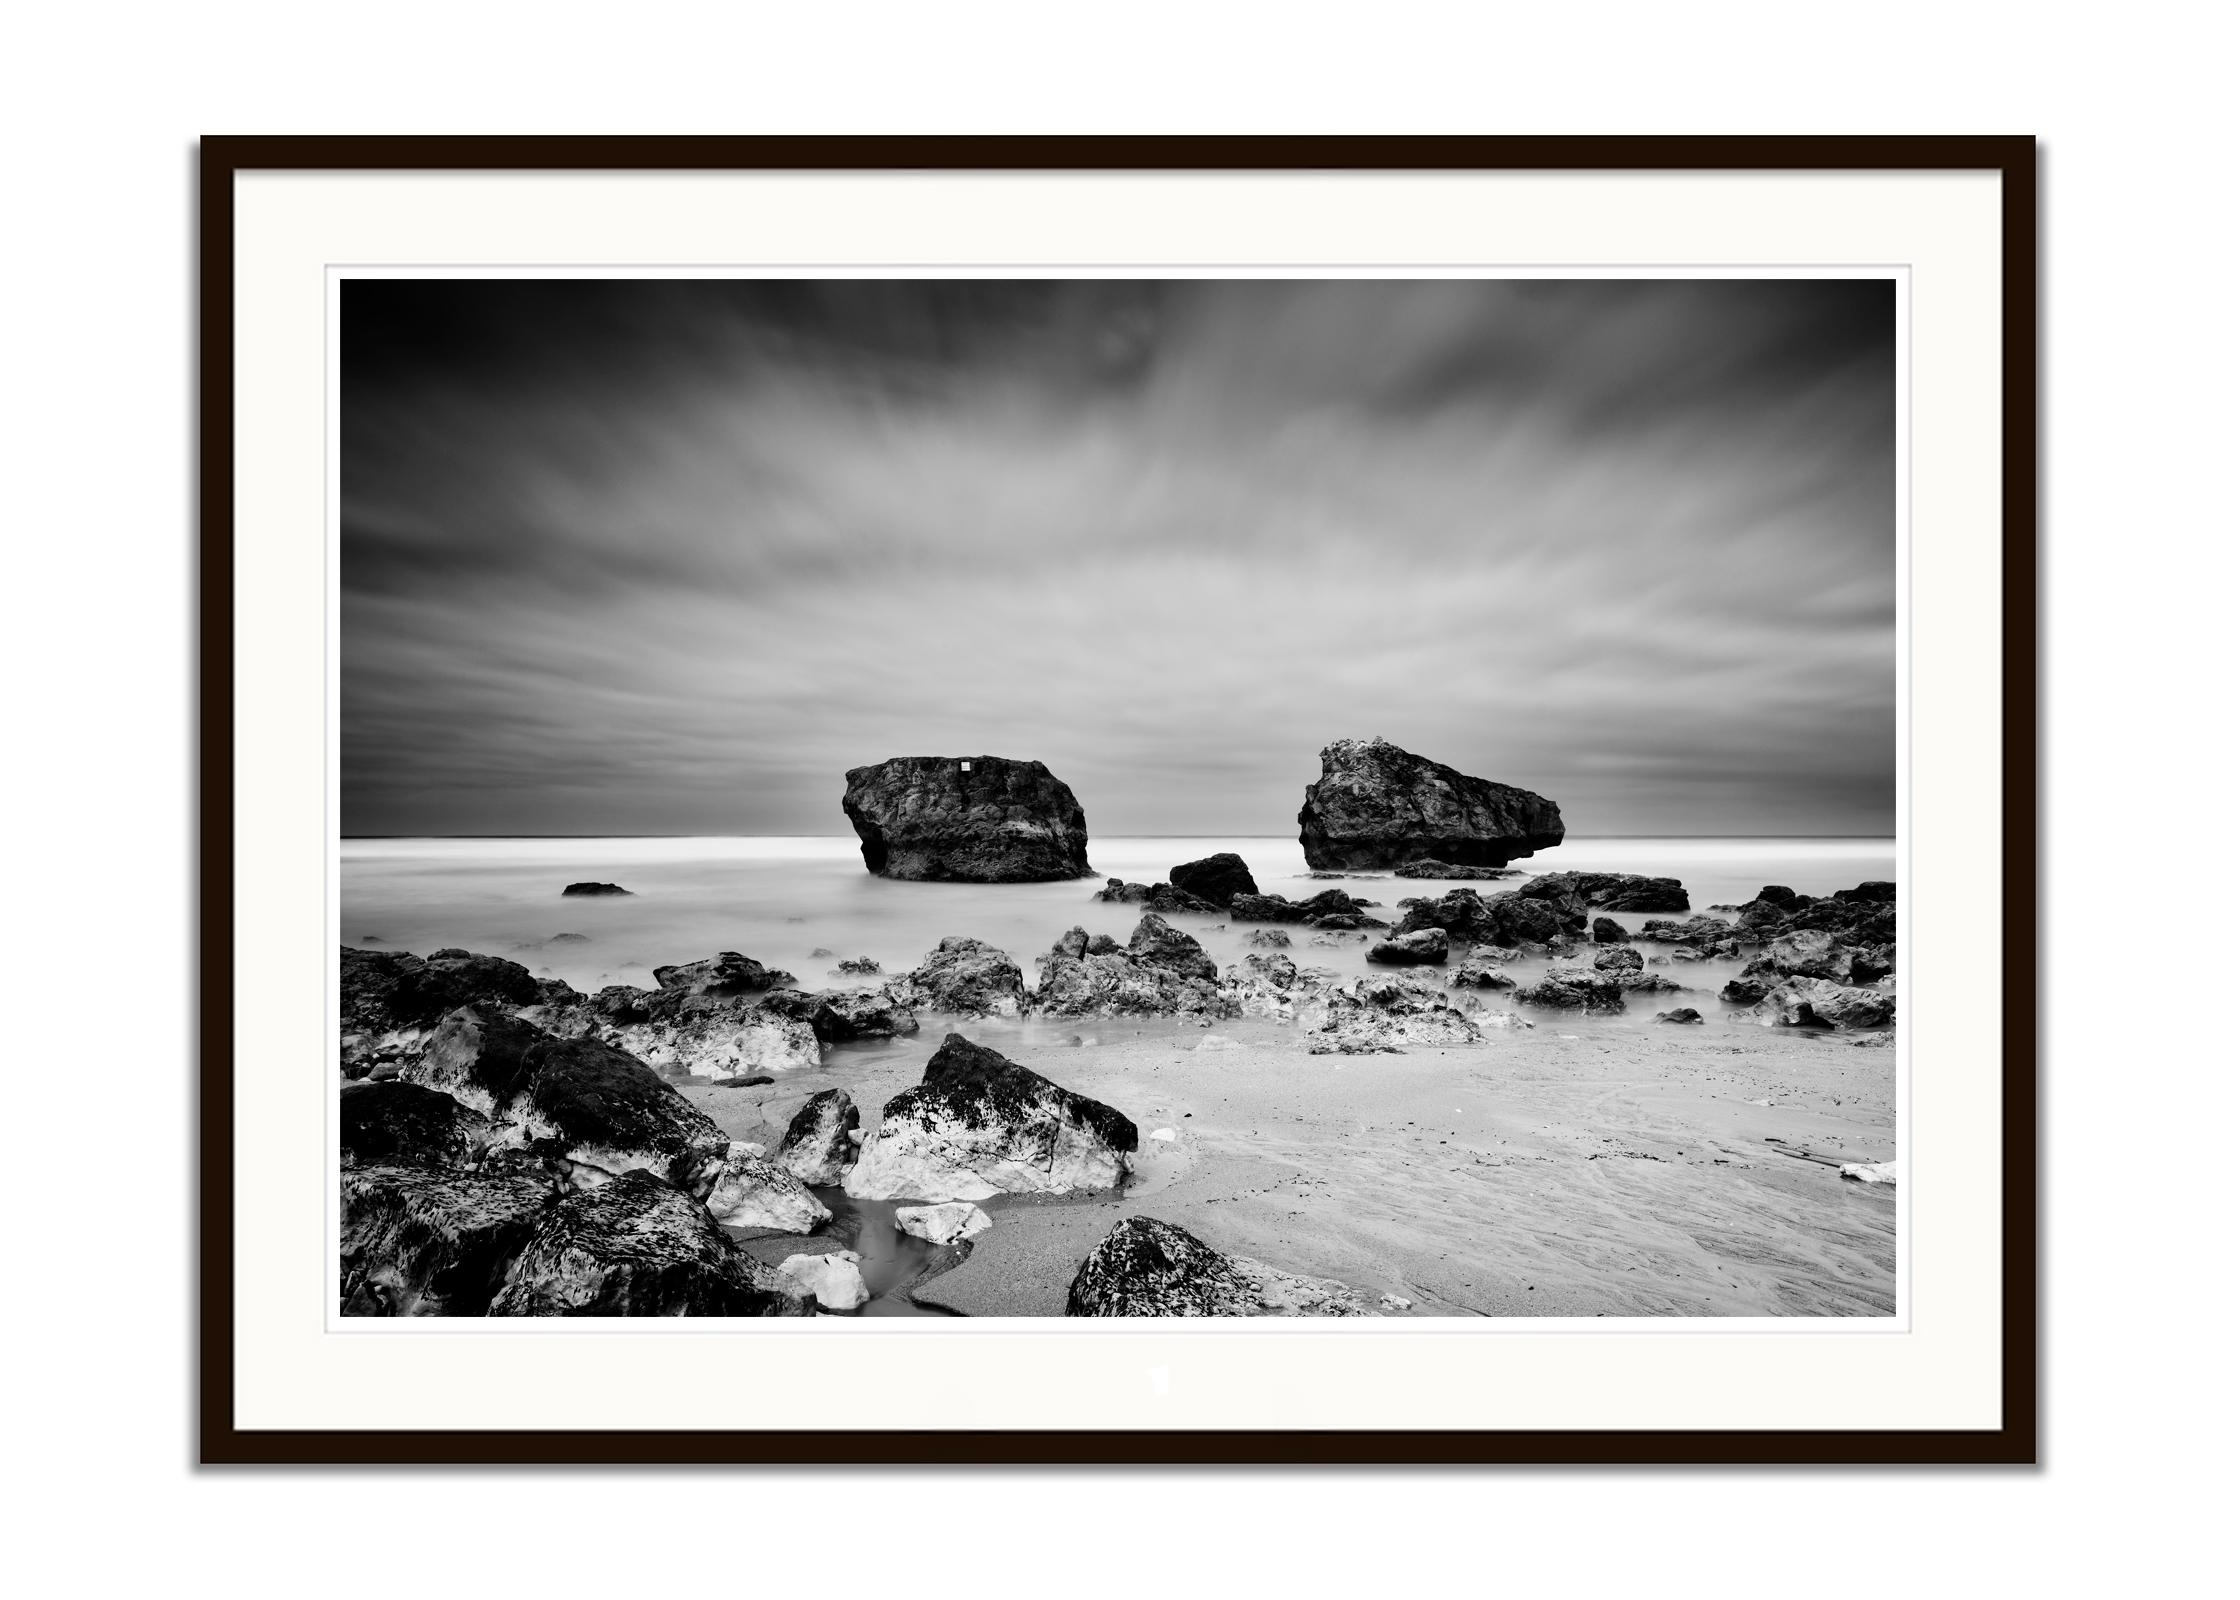 Black and white fine art long exposure waterscape - landscape photography. Giant rocks on the sandy beach of the Atlantic coast in France. Archival pigment ink print as part of a limited edition of 7. All Gerald Berghammer prints are made to order